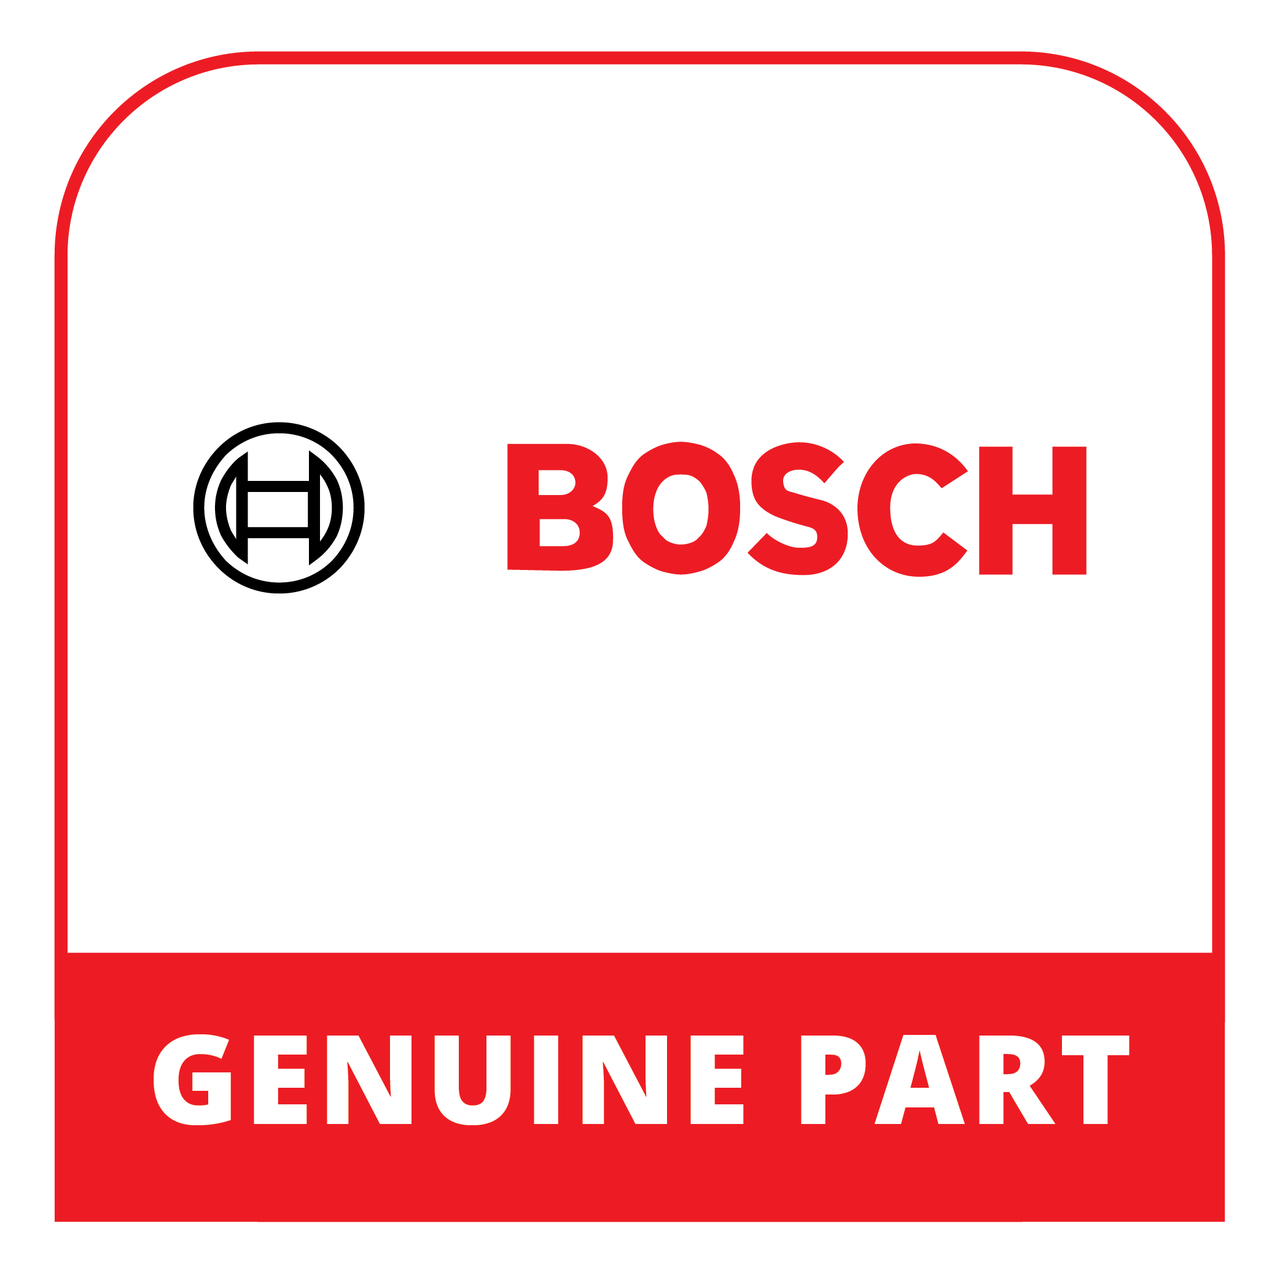 Bosch (Thermador) 12029777 - Water Softener - Genuine Bosch (Thermador) Part